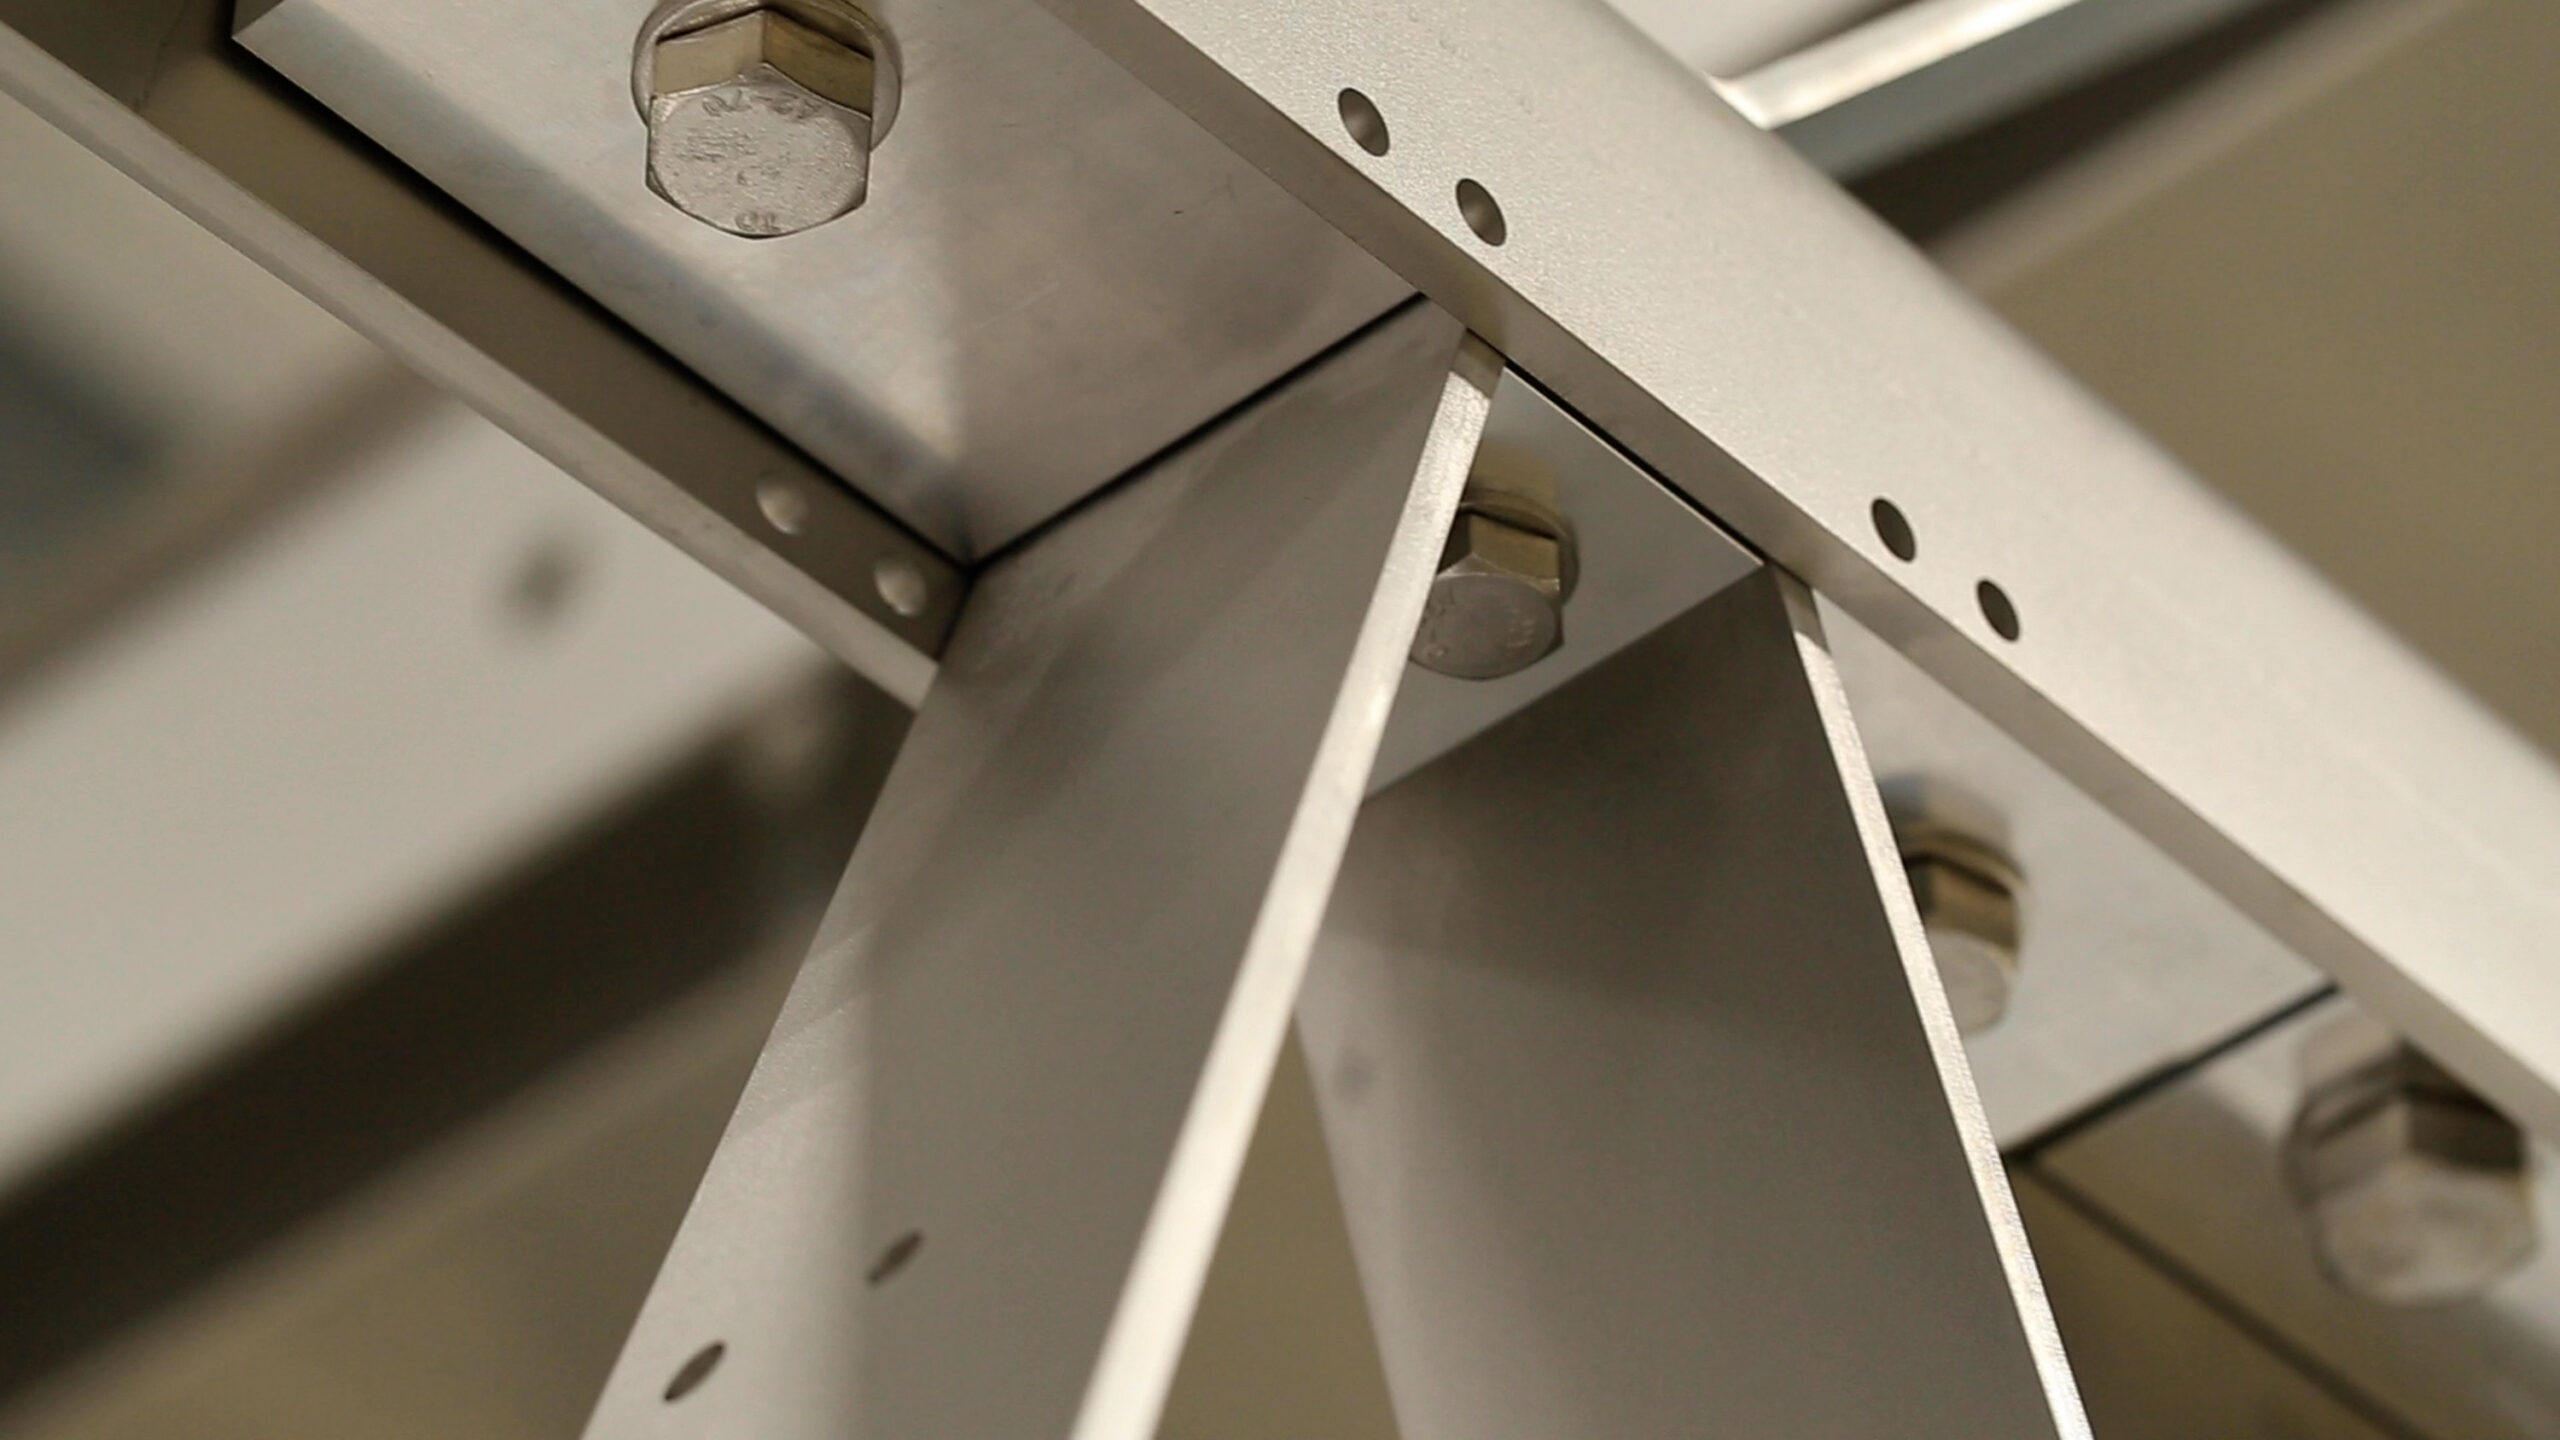 Detail shot of AVA Bridge components, including bolts, and bars of metal screwed together.